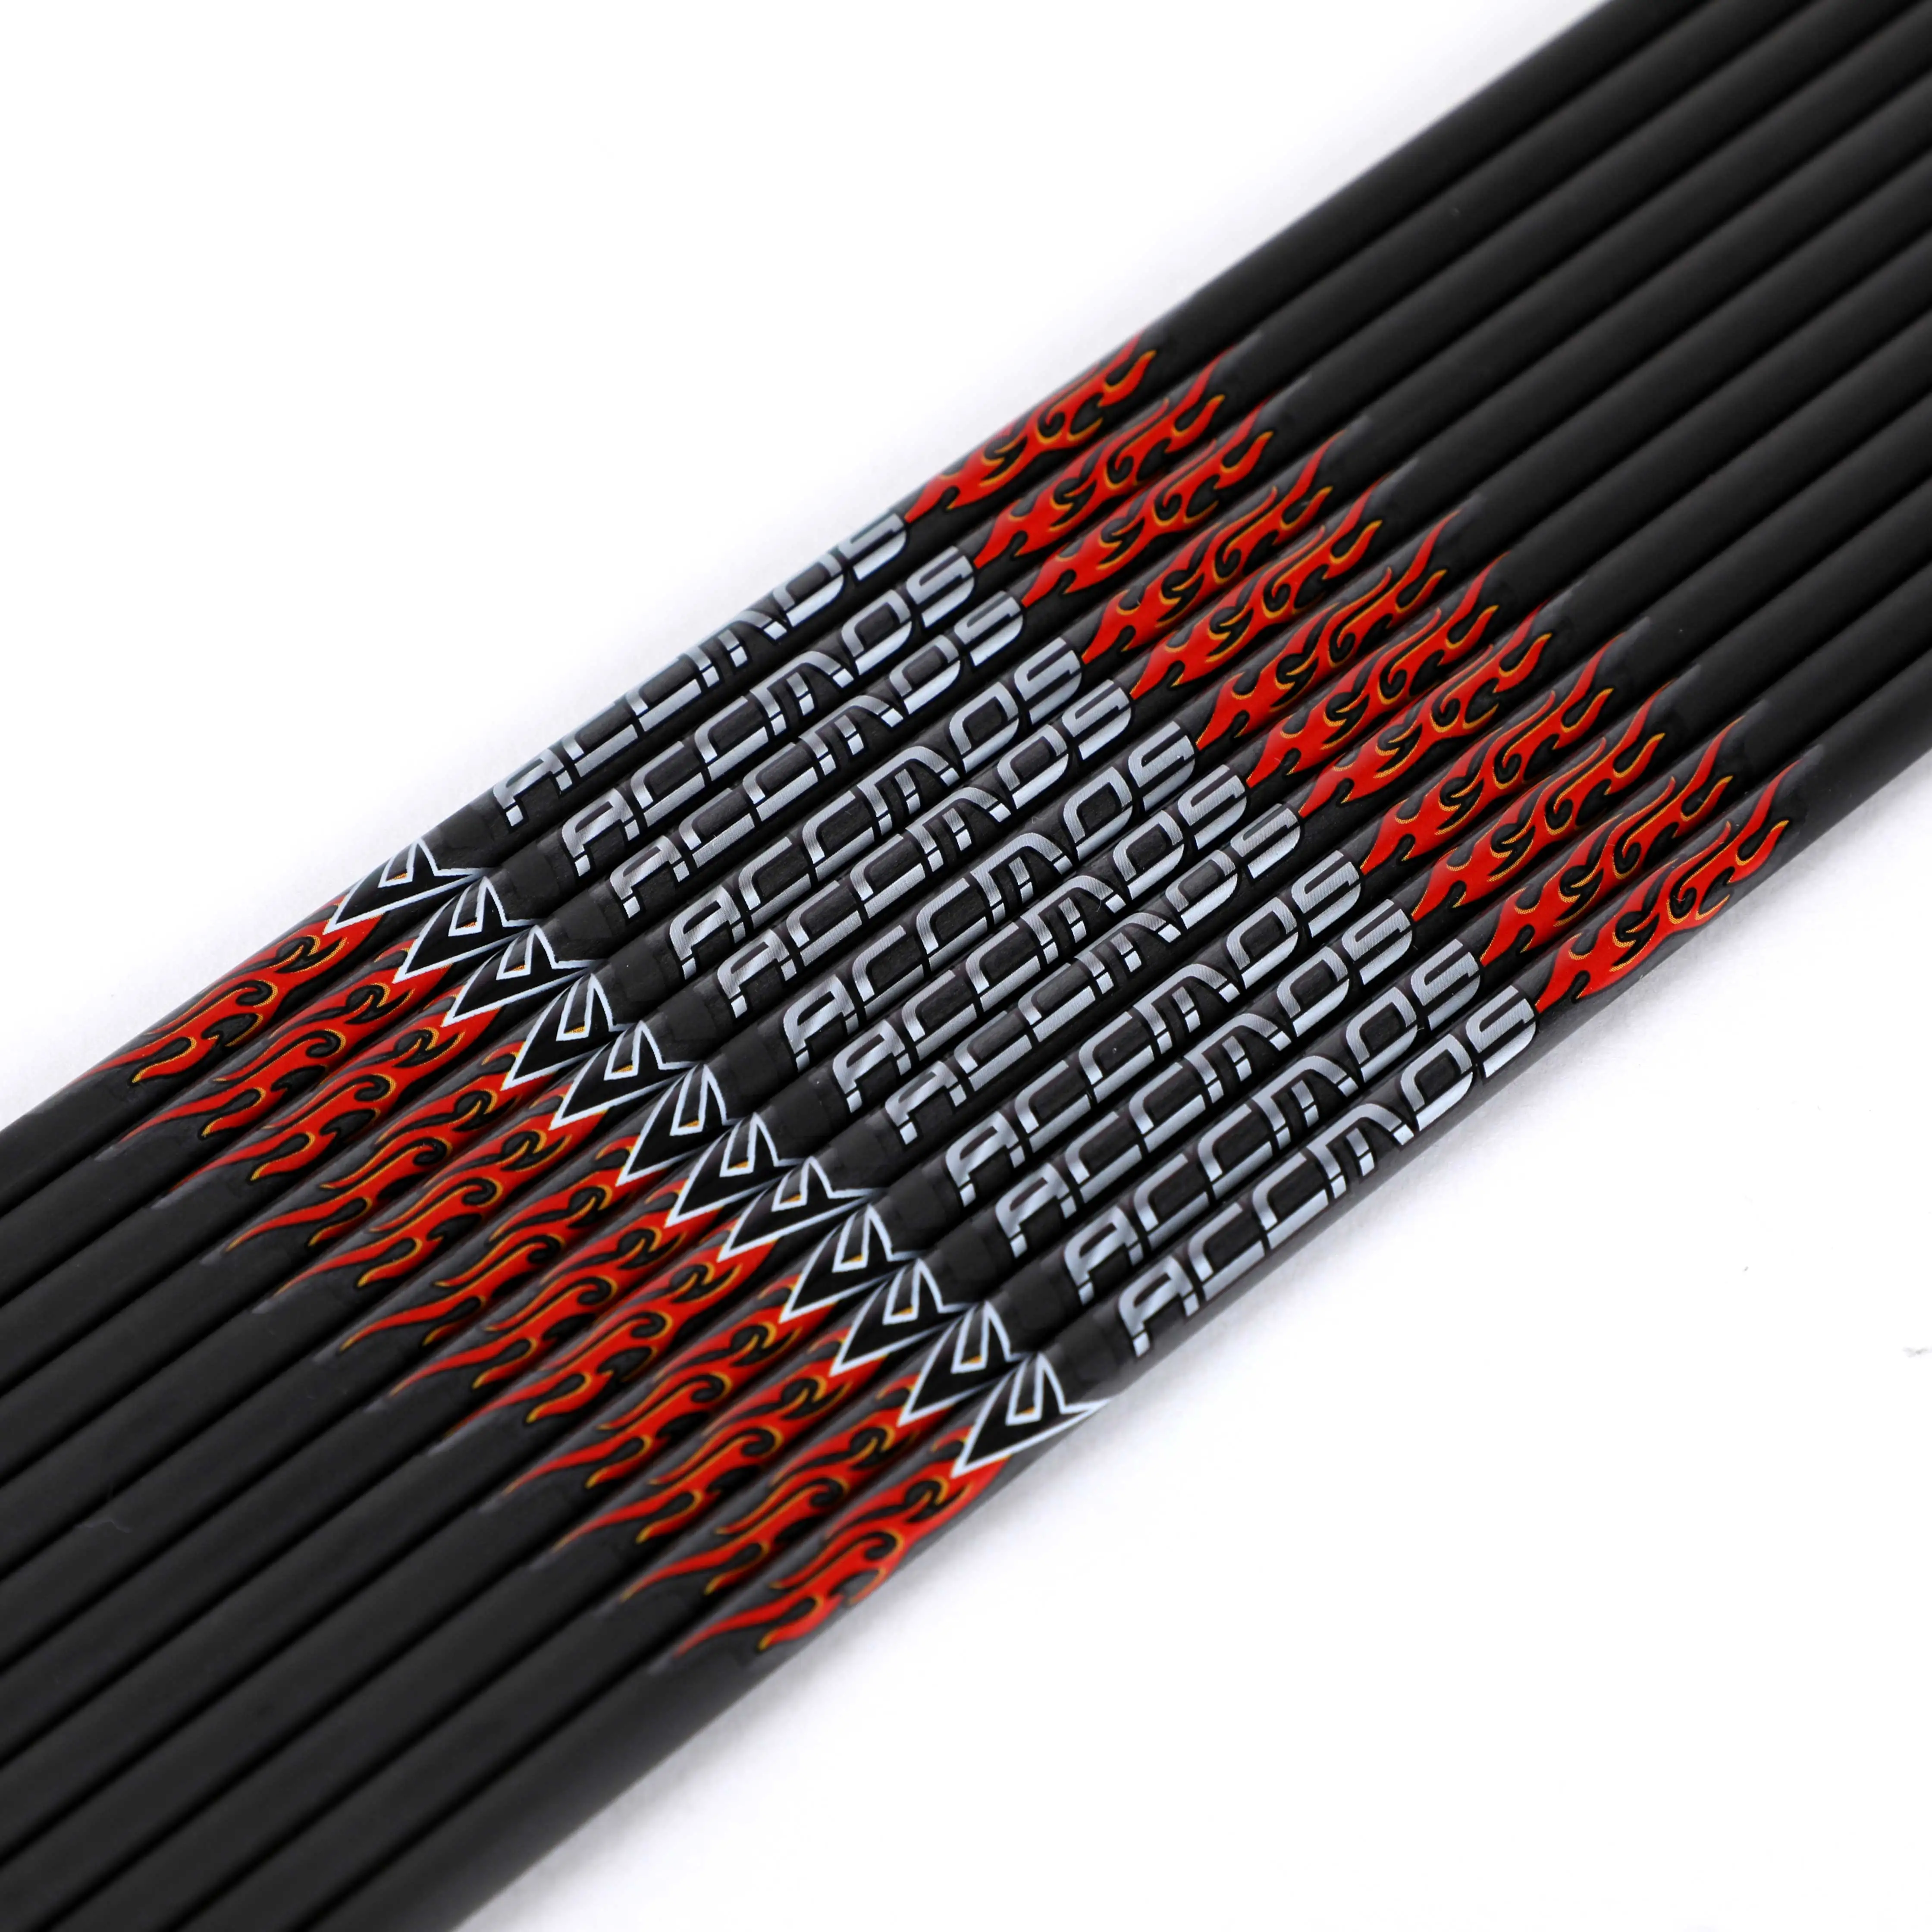 

ACCMOS ID9.8mm Spine 200-350 Carbon Arrow Compound Bow Archery Tube Fiber Arrow Shafts bow and arrow Hunting shooting